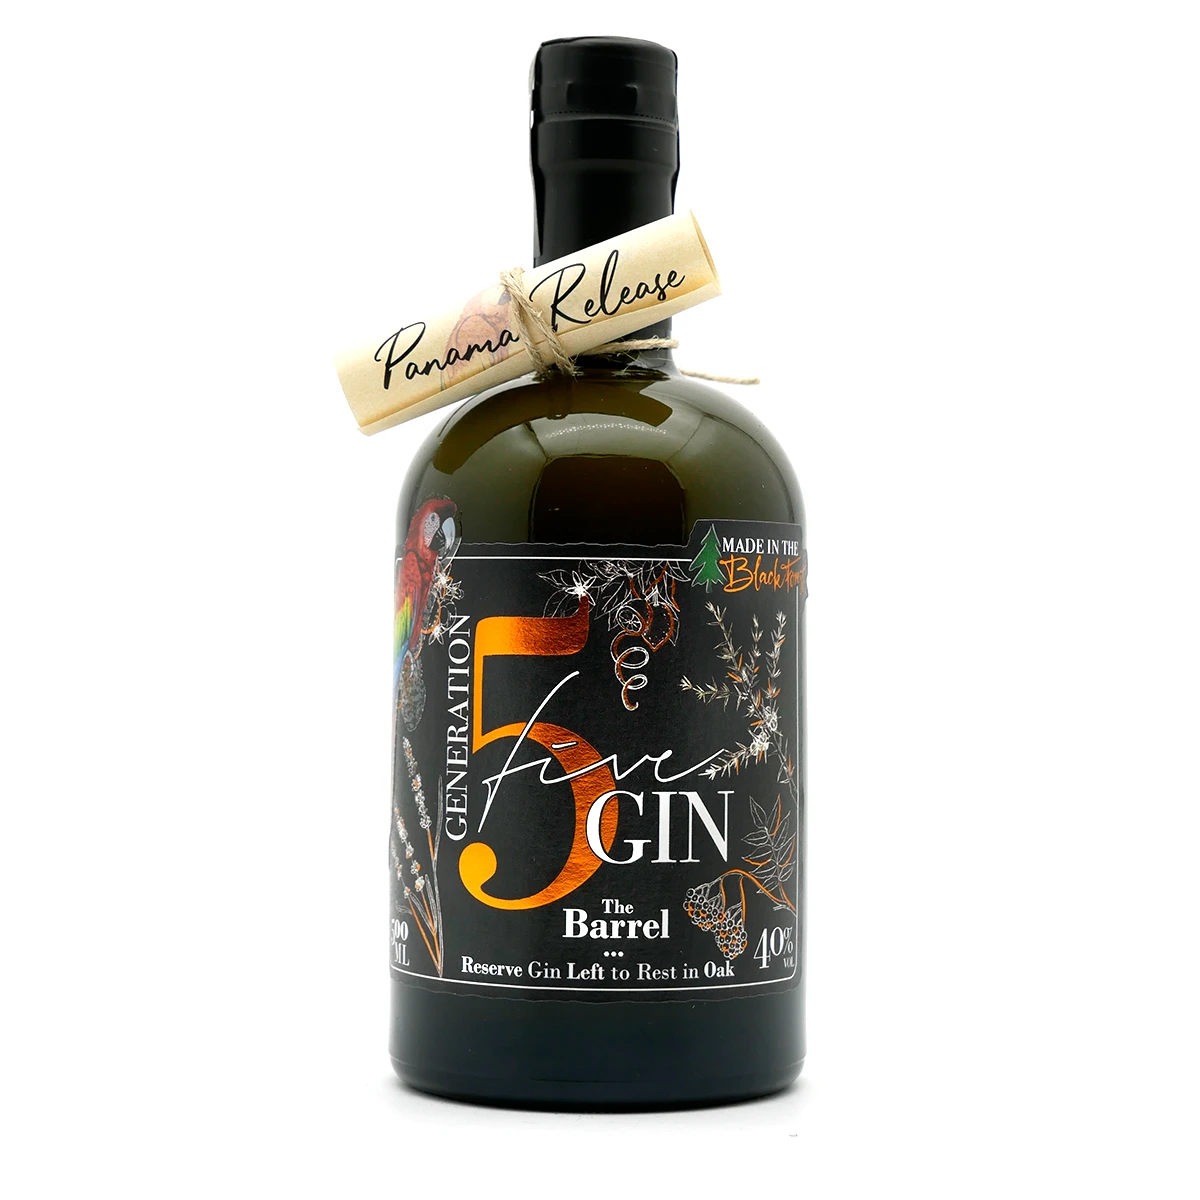 PANAMA Black - Gin Forest SELECT 5 Generation Gin